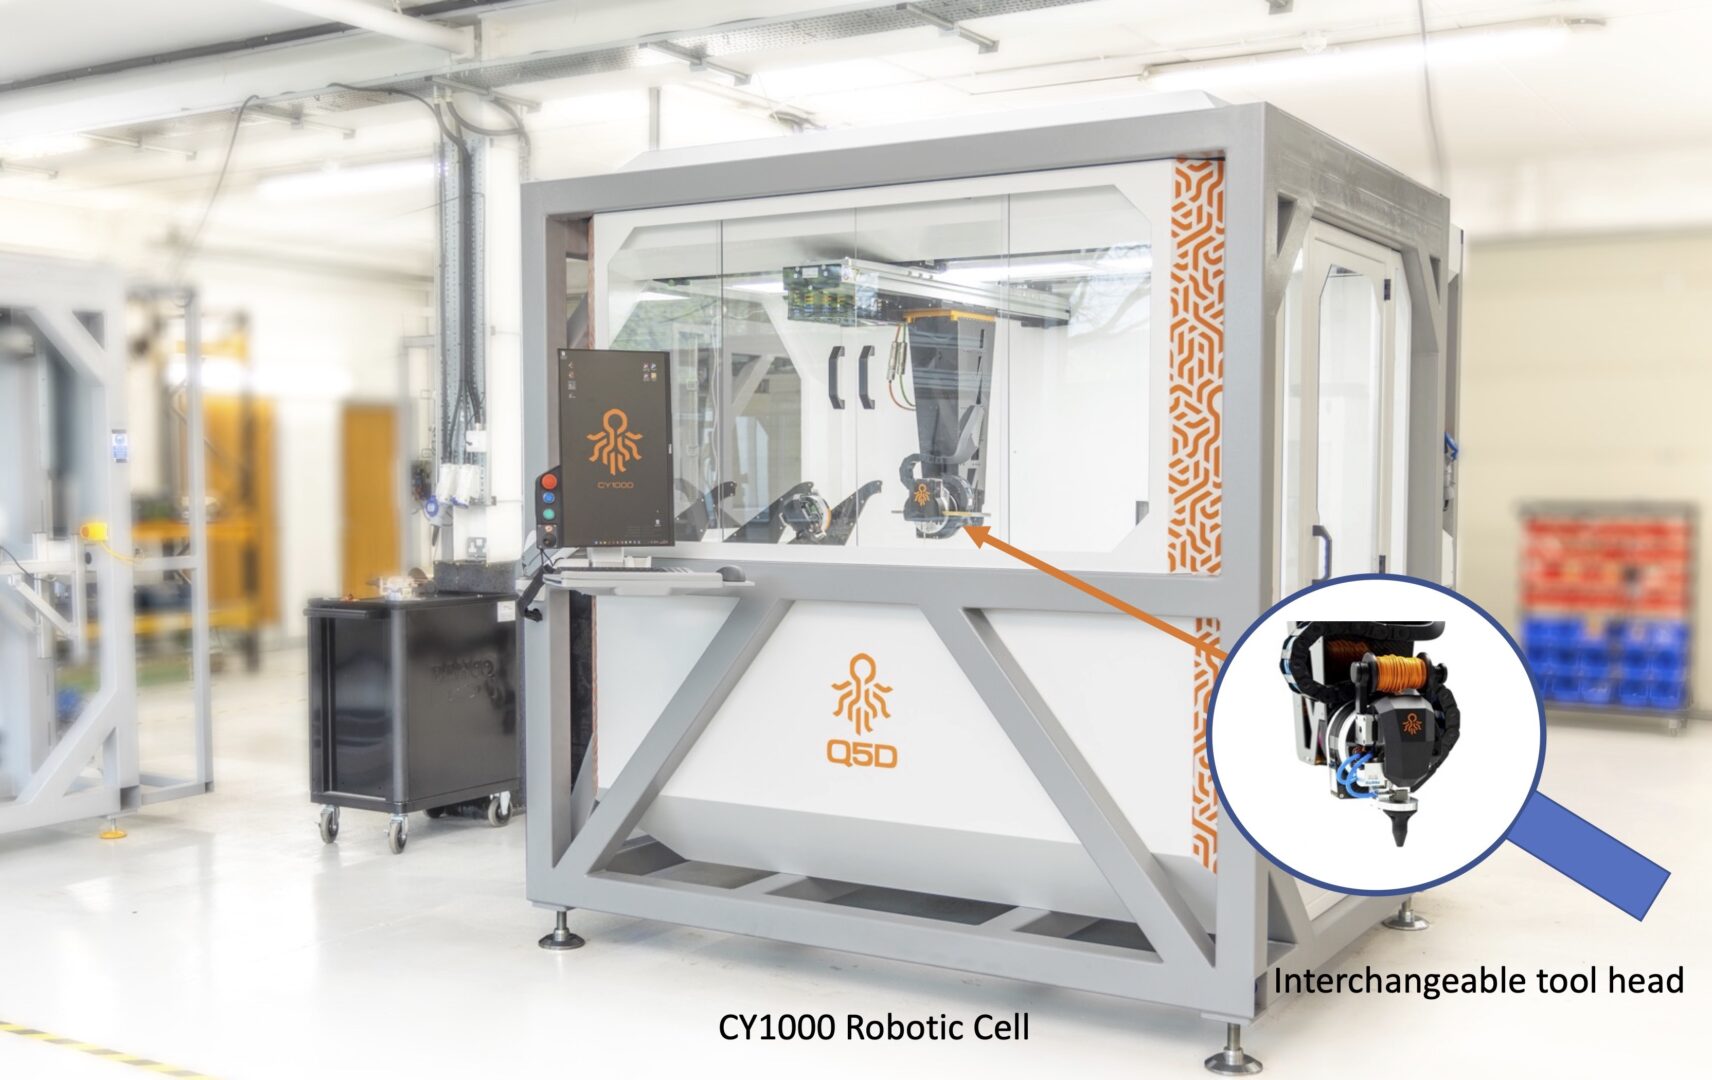 5-Axis additive manufacturing robot that automates eliminates wire harnesses